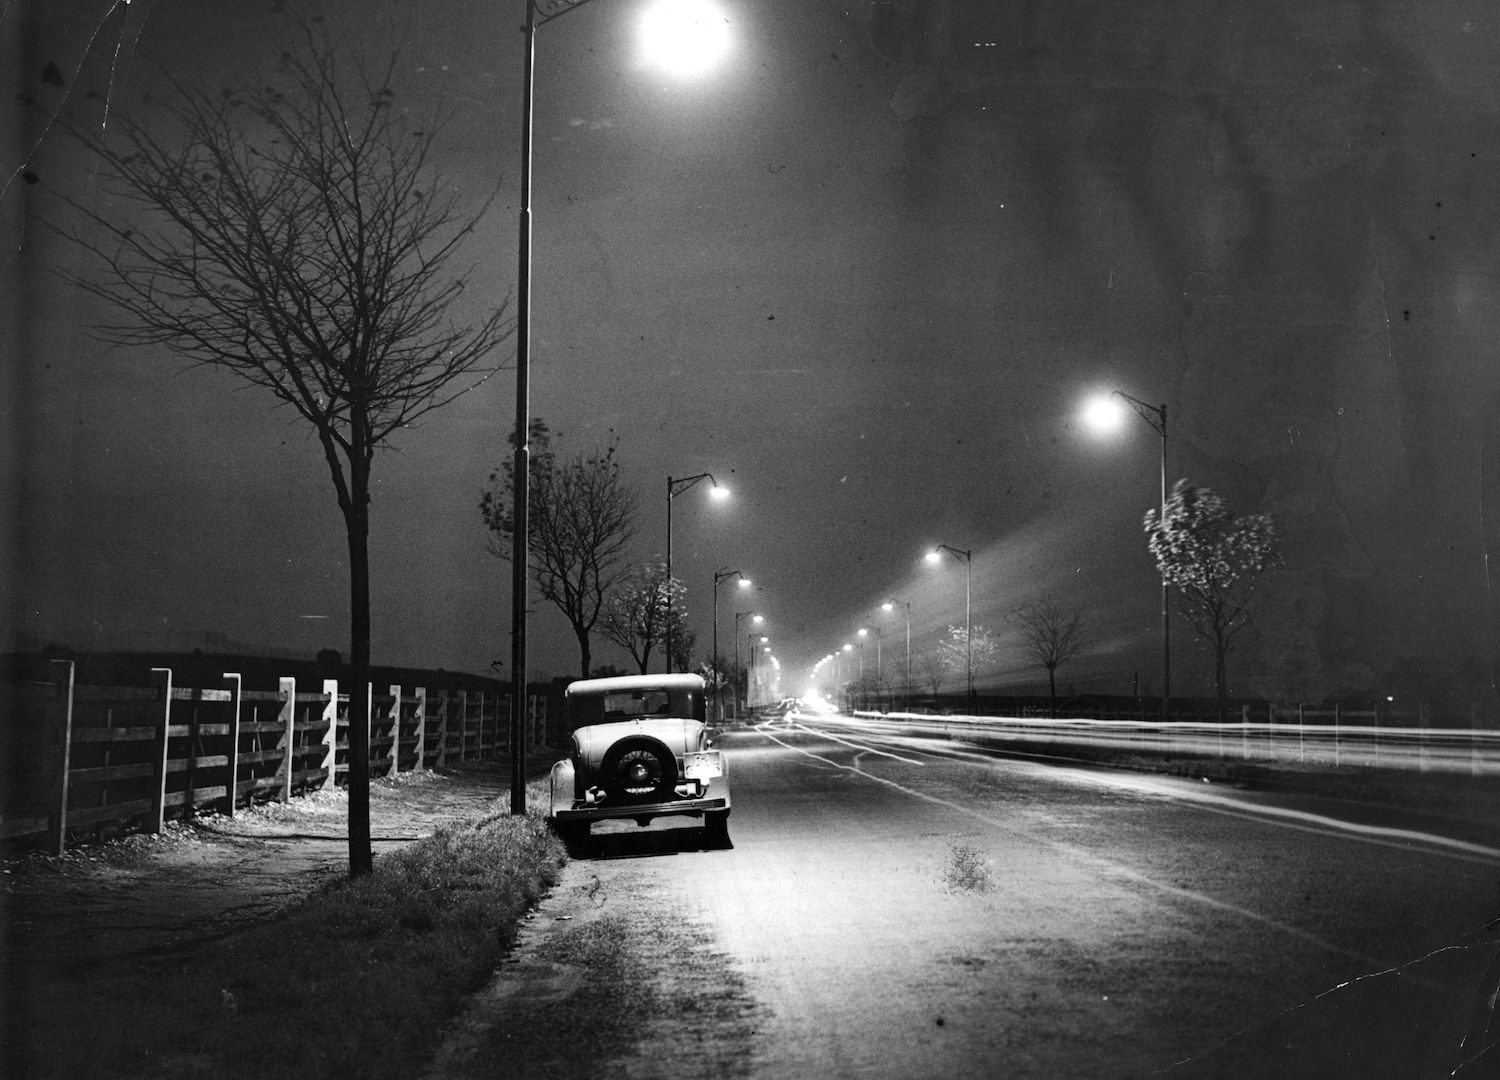 A car parked on a deserted road at night. Finding parking is one reason Why You’ll Regret Living in a Car Full Time. | Keystone/Getty Images